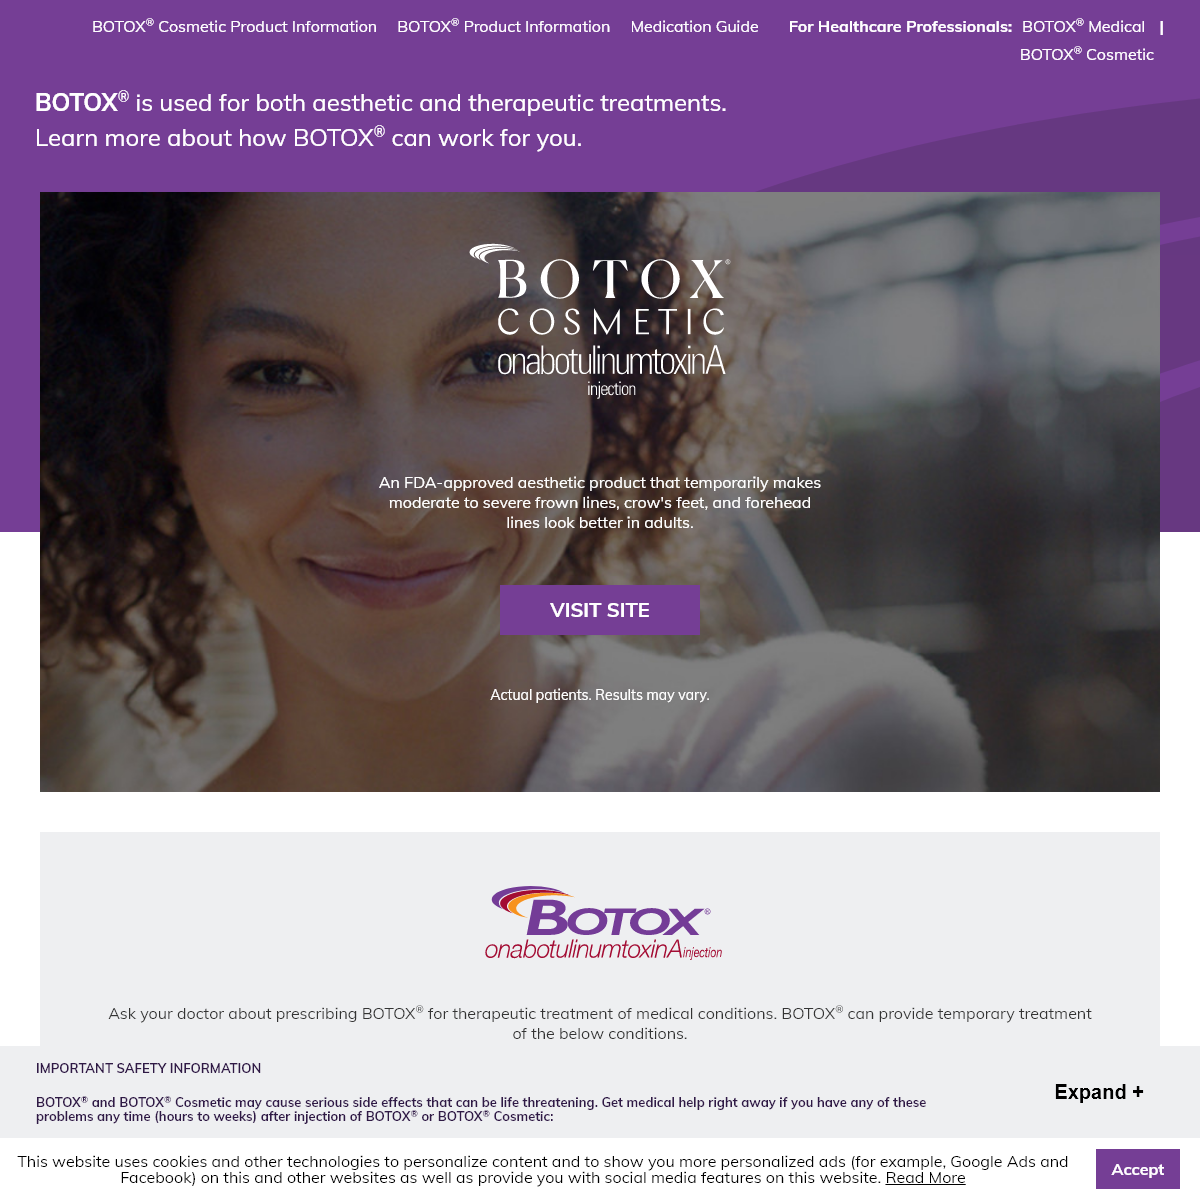 A complete backup of botox.com